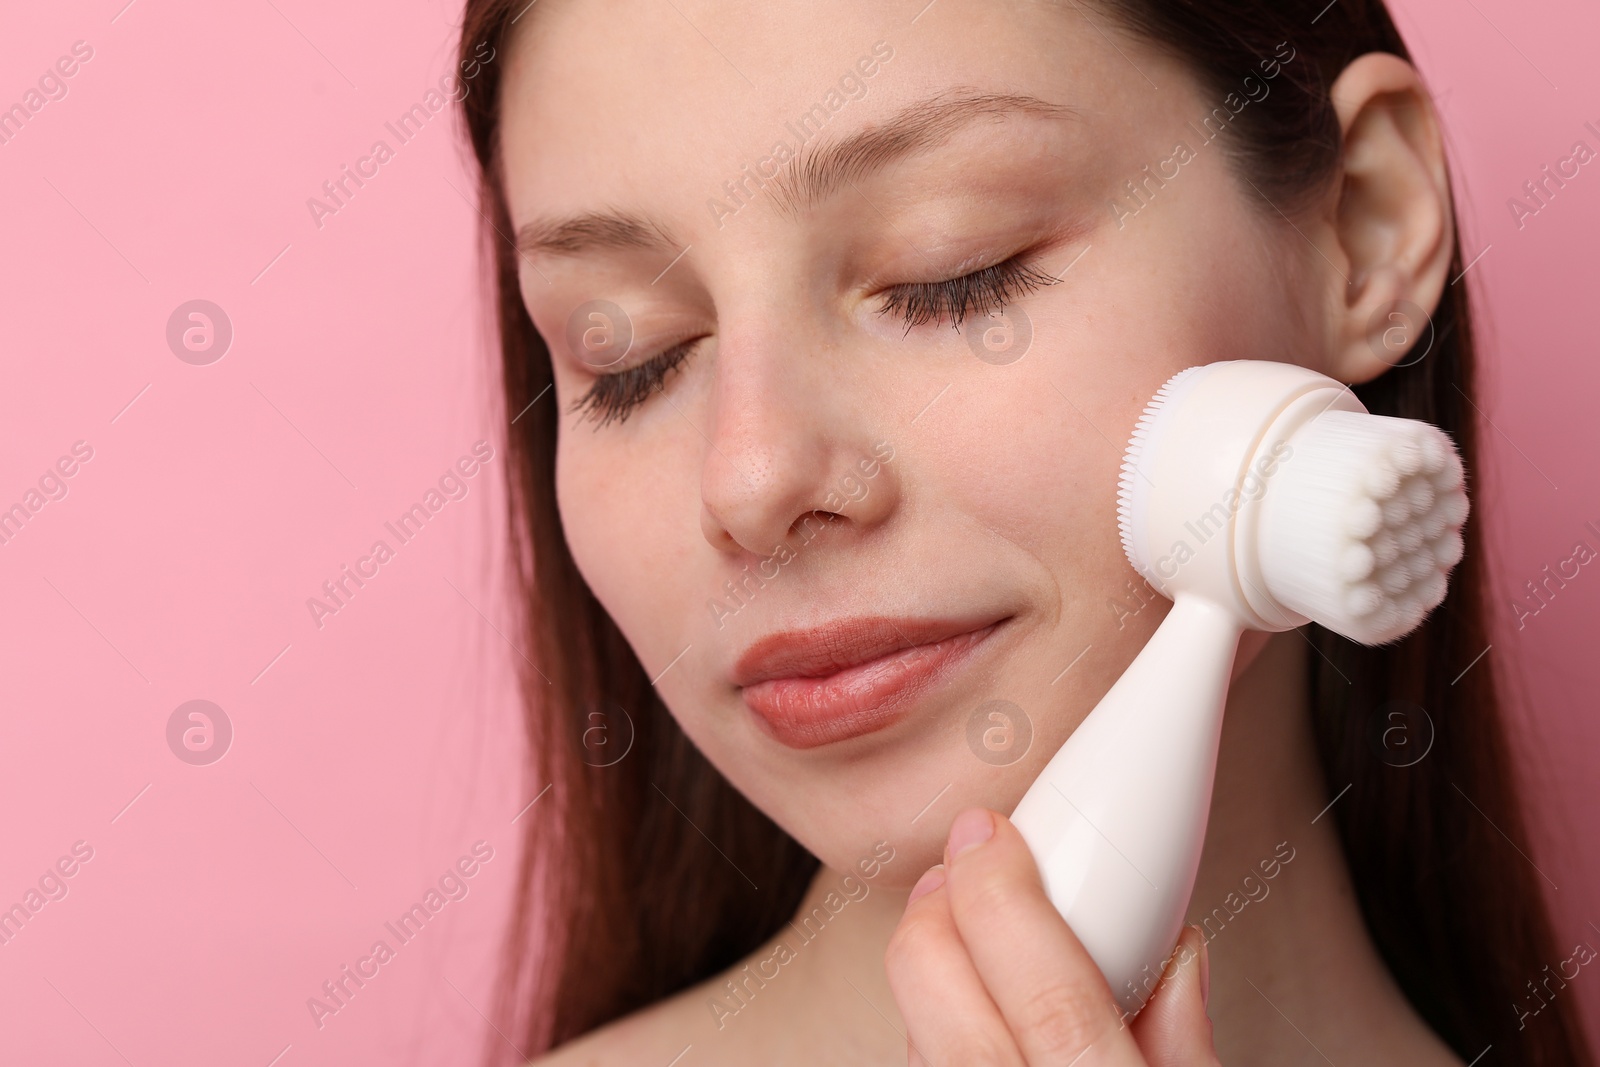 Photo of Washing face. Young woman with cleansing brush on pink background, closeup